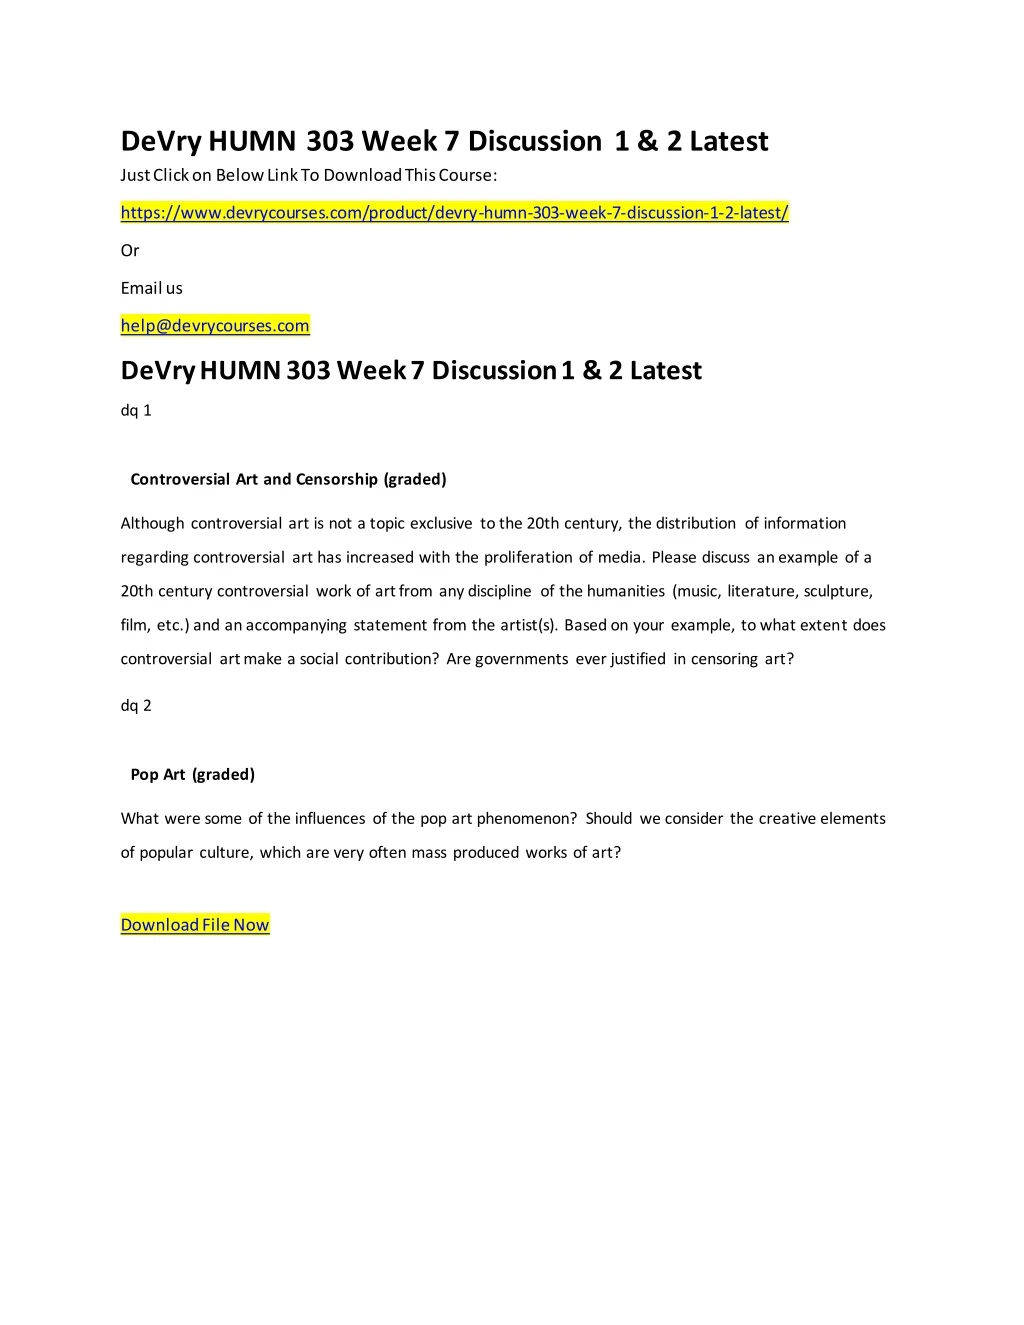 devry humn 303 week 7 discussion 1 2 latest just